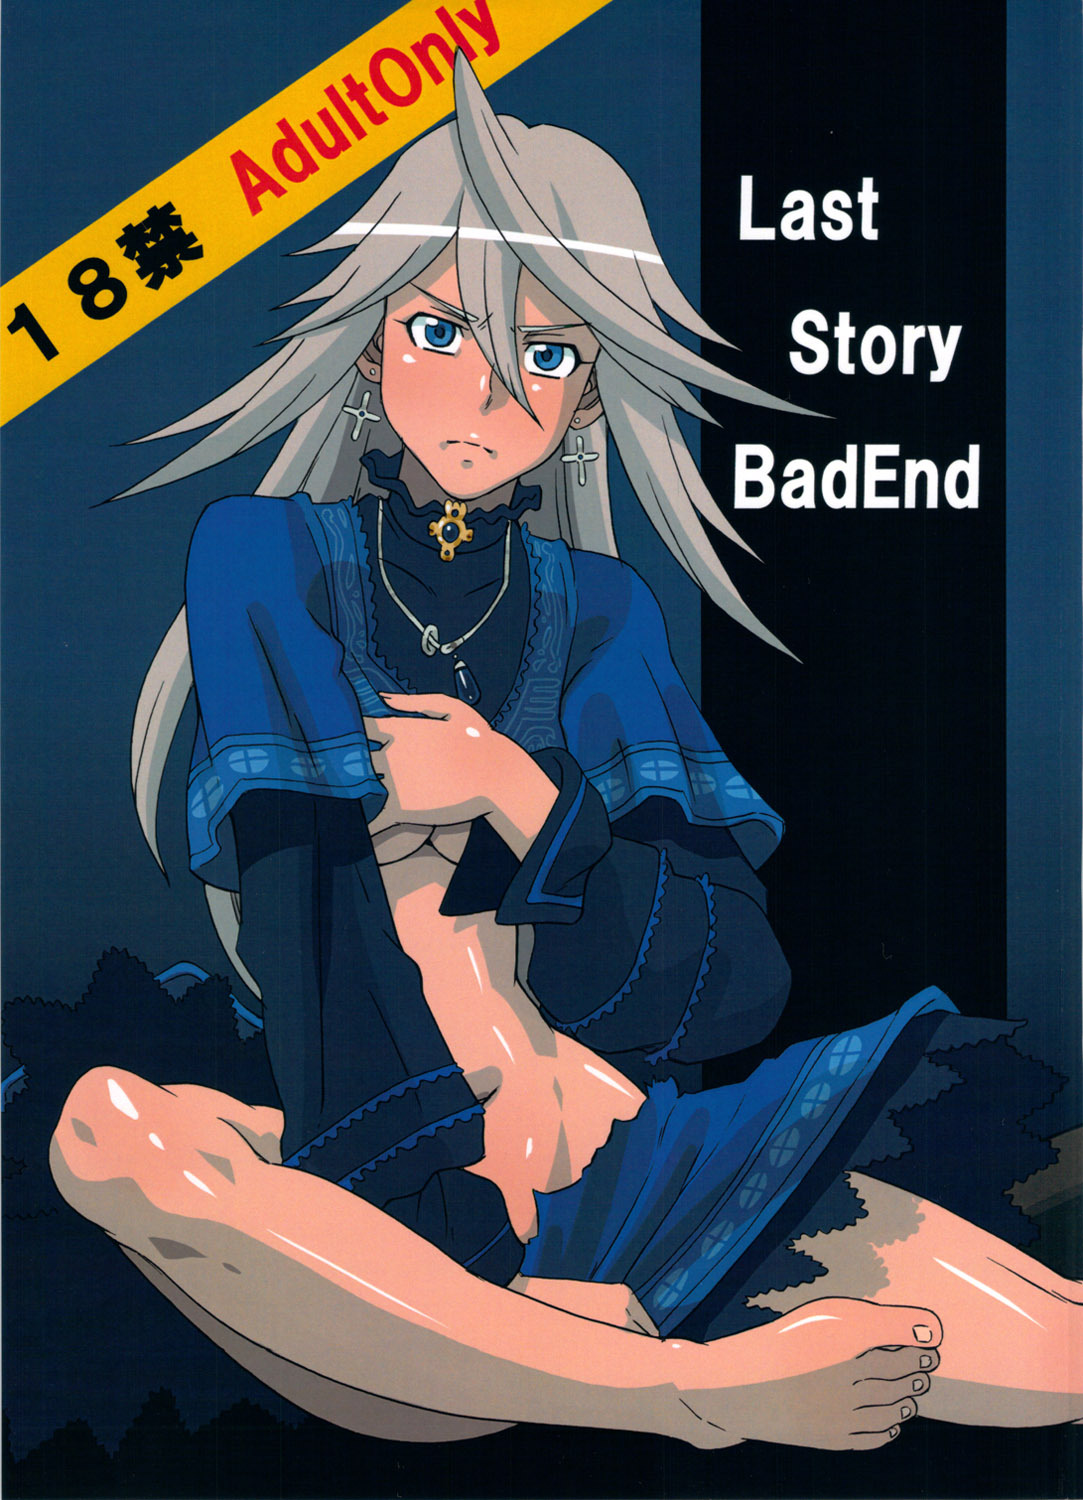 (C80) [BooBooKid (PIP)] LAST STORY BADEND (The Last Story) page 1 full